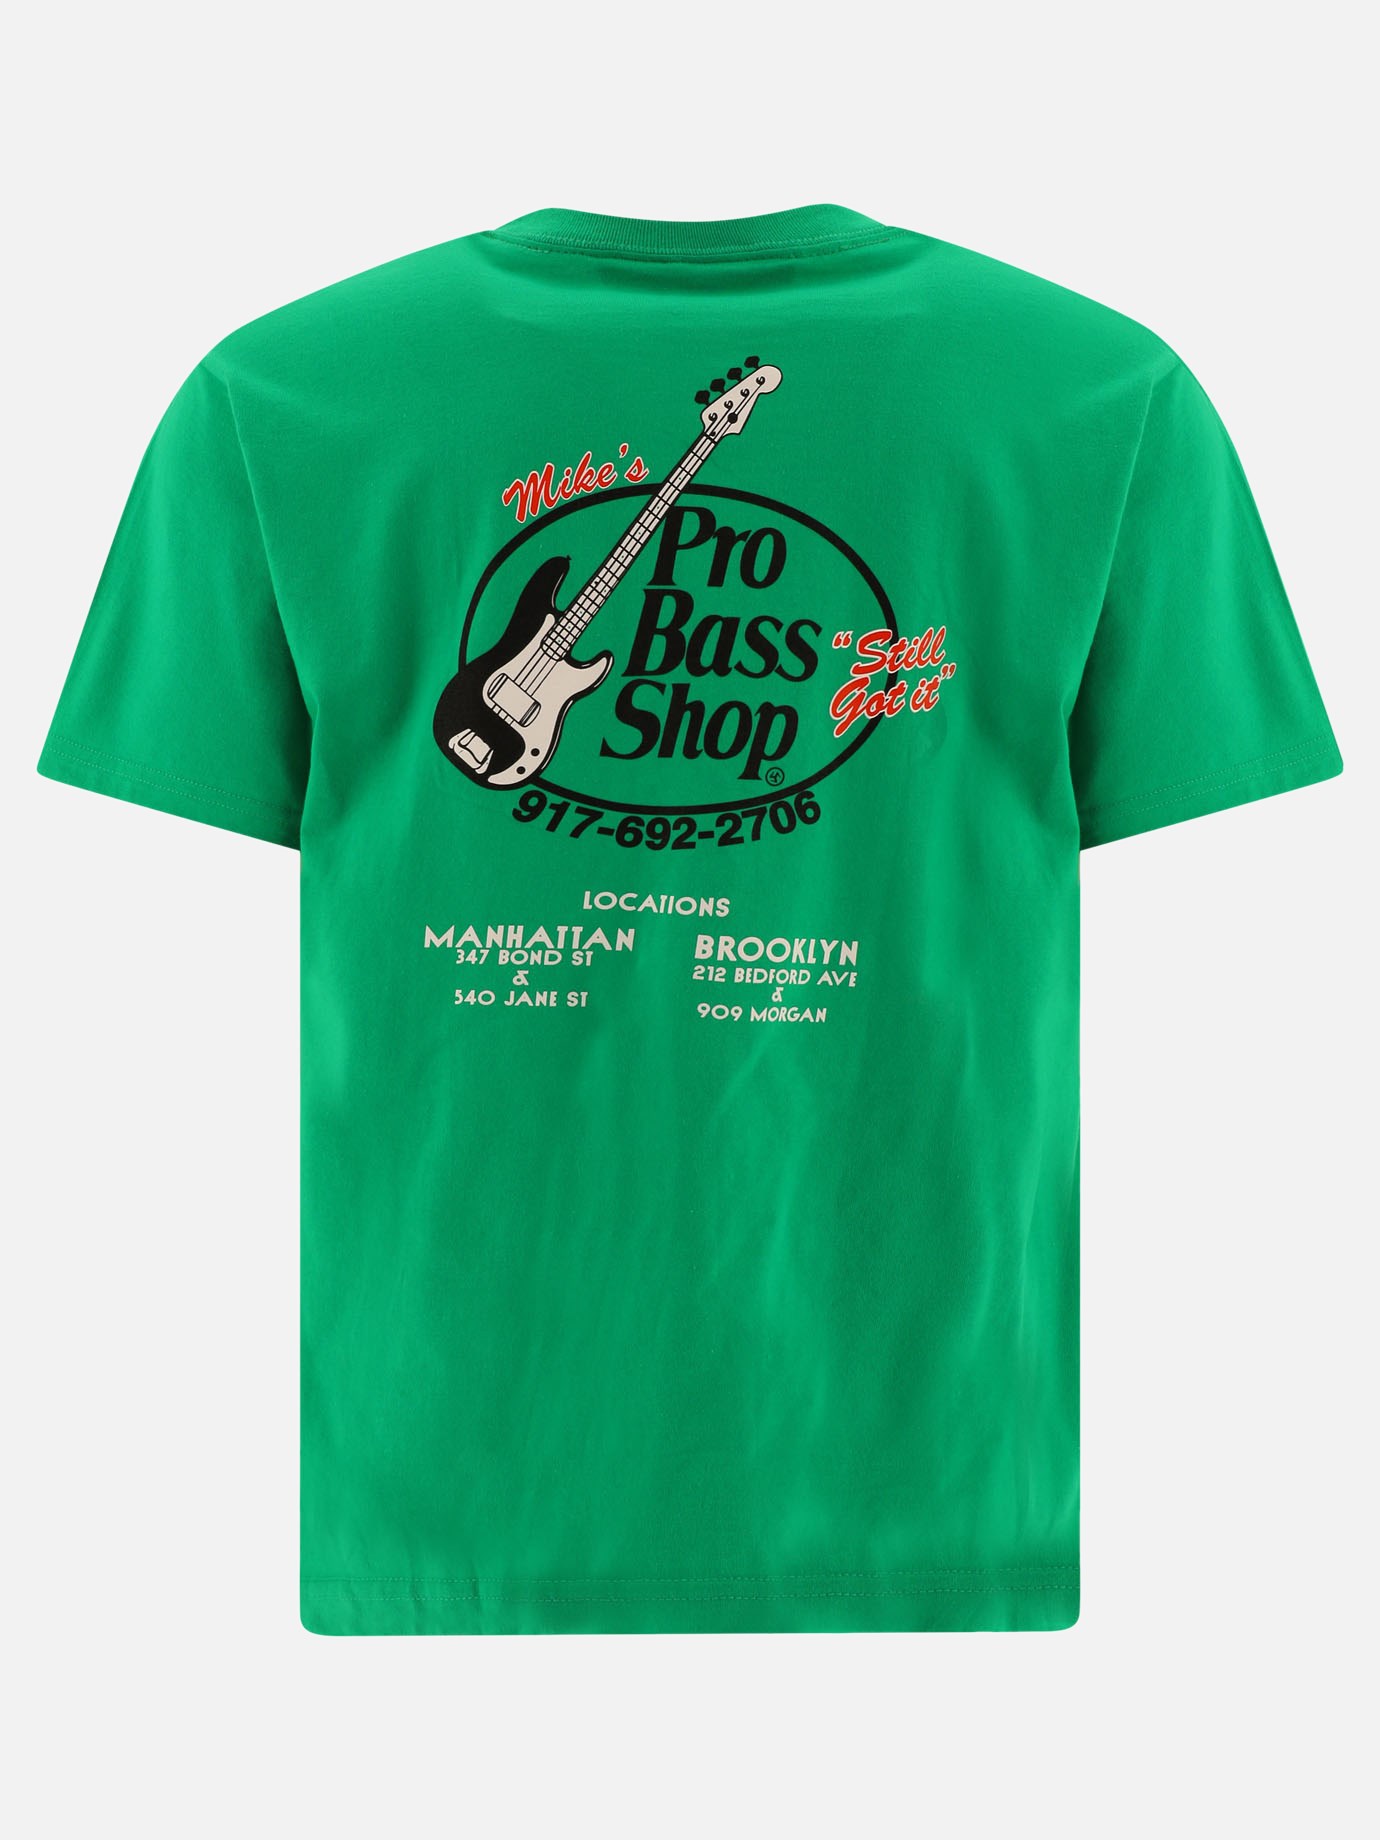 T-shirt  Pro Bass  by Call Me 917